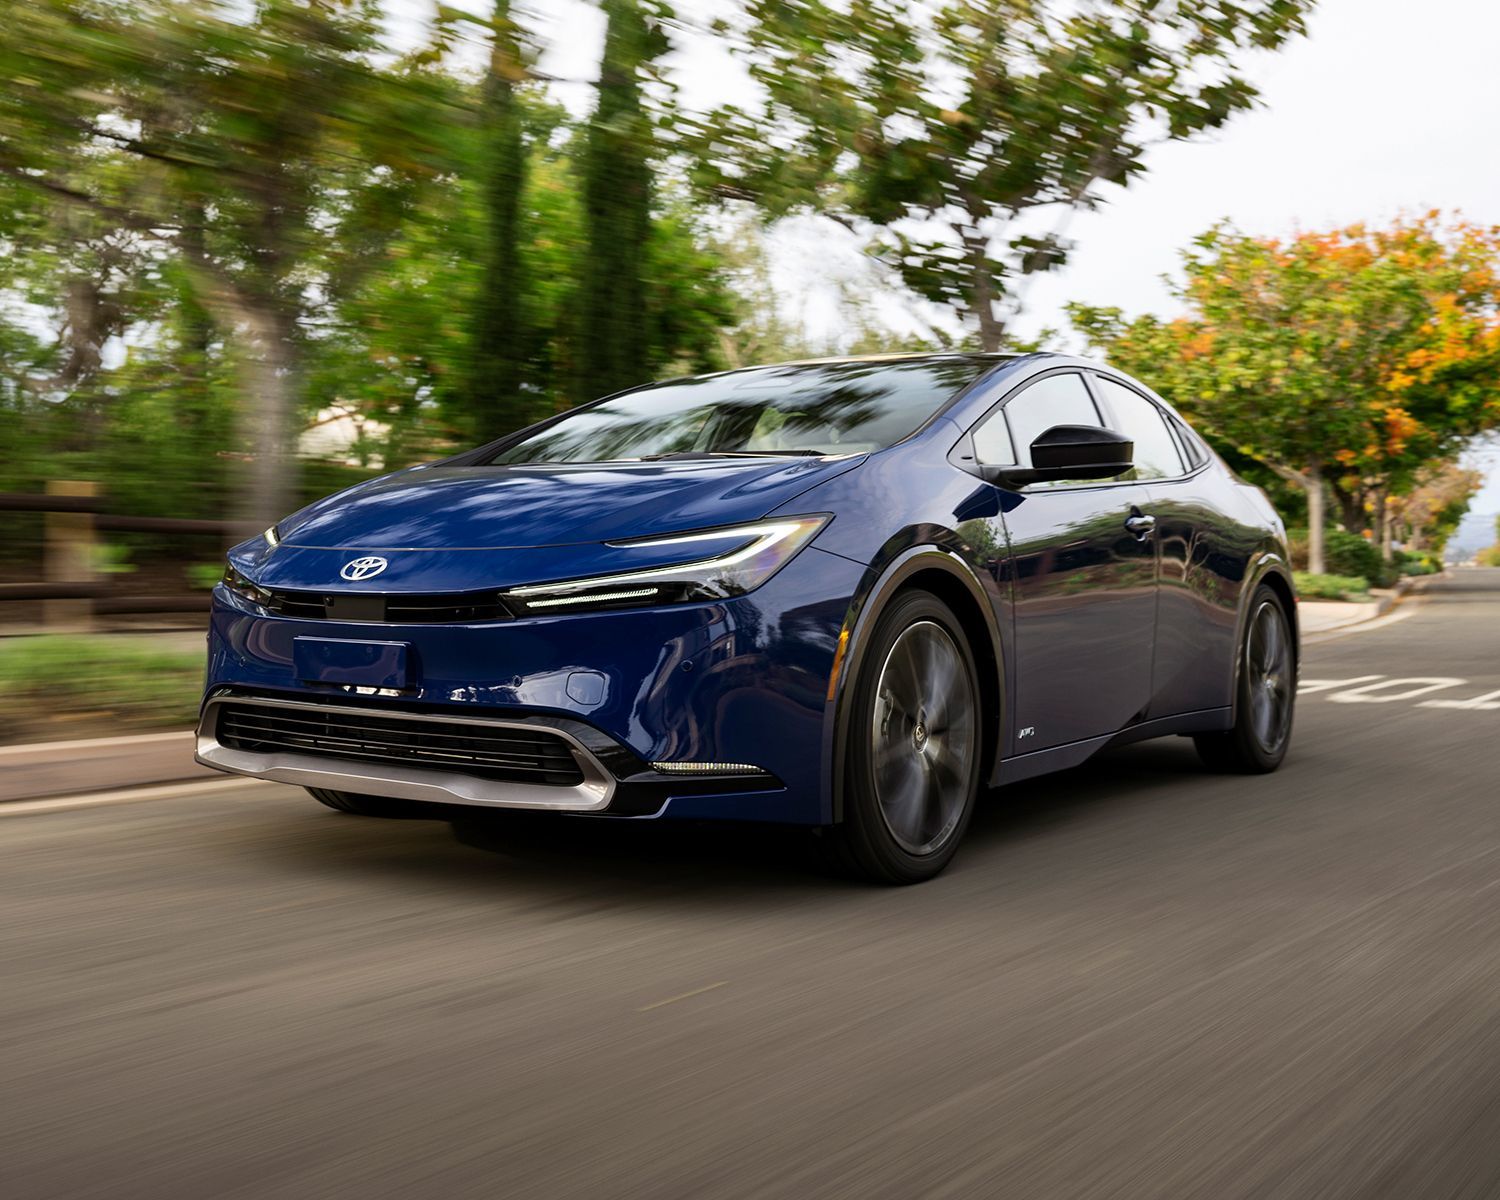 EXPLORE PRIUS All-new, Completely Re-imagined